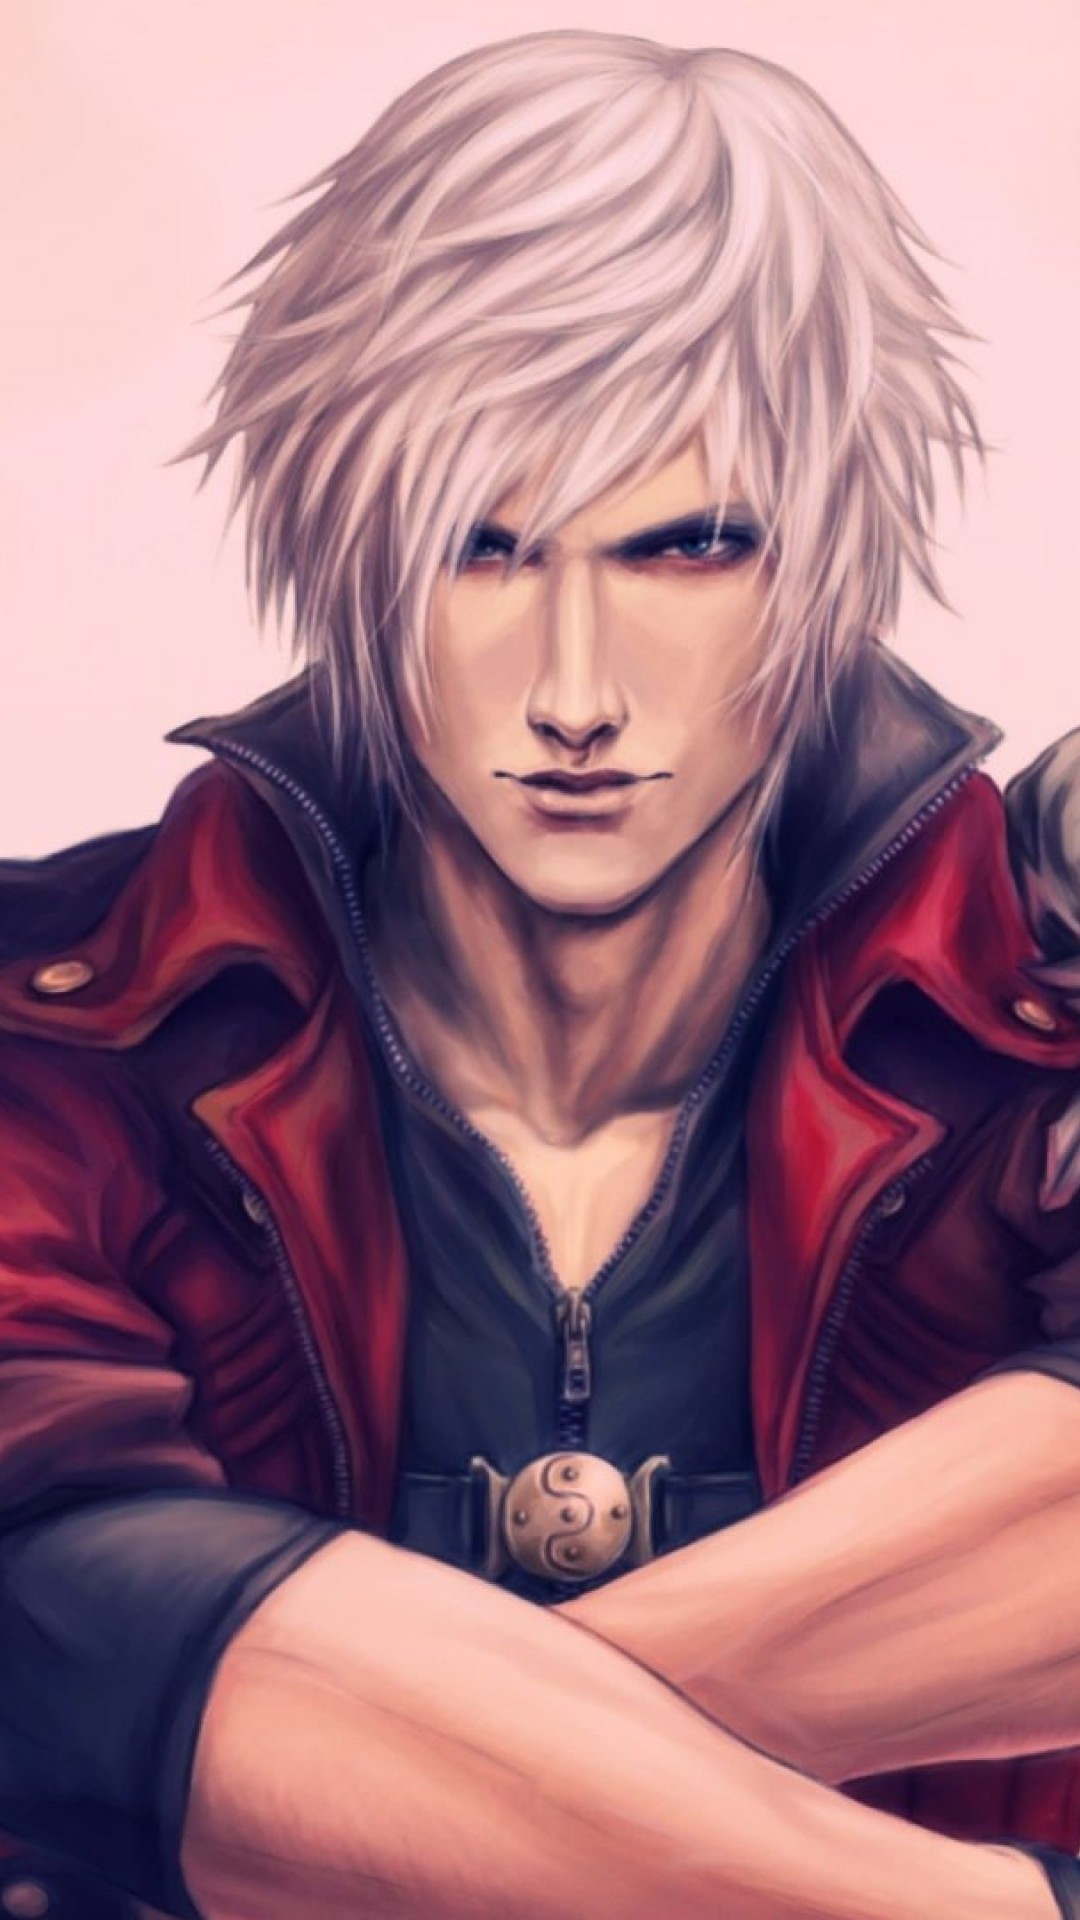 Dante - Devil May Cry Wallpaper for SAMSUNG Galaxy S5